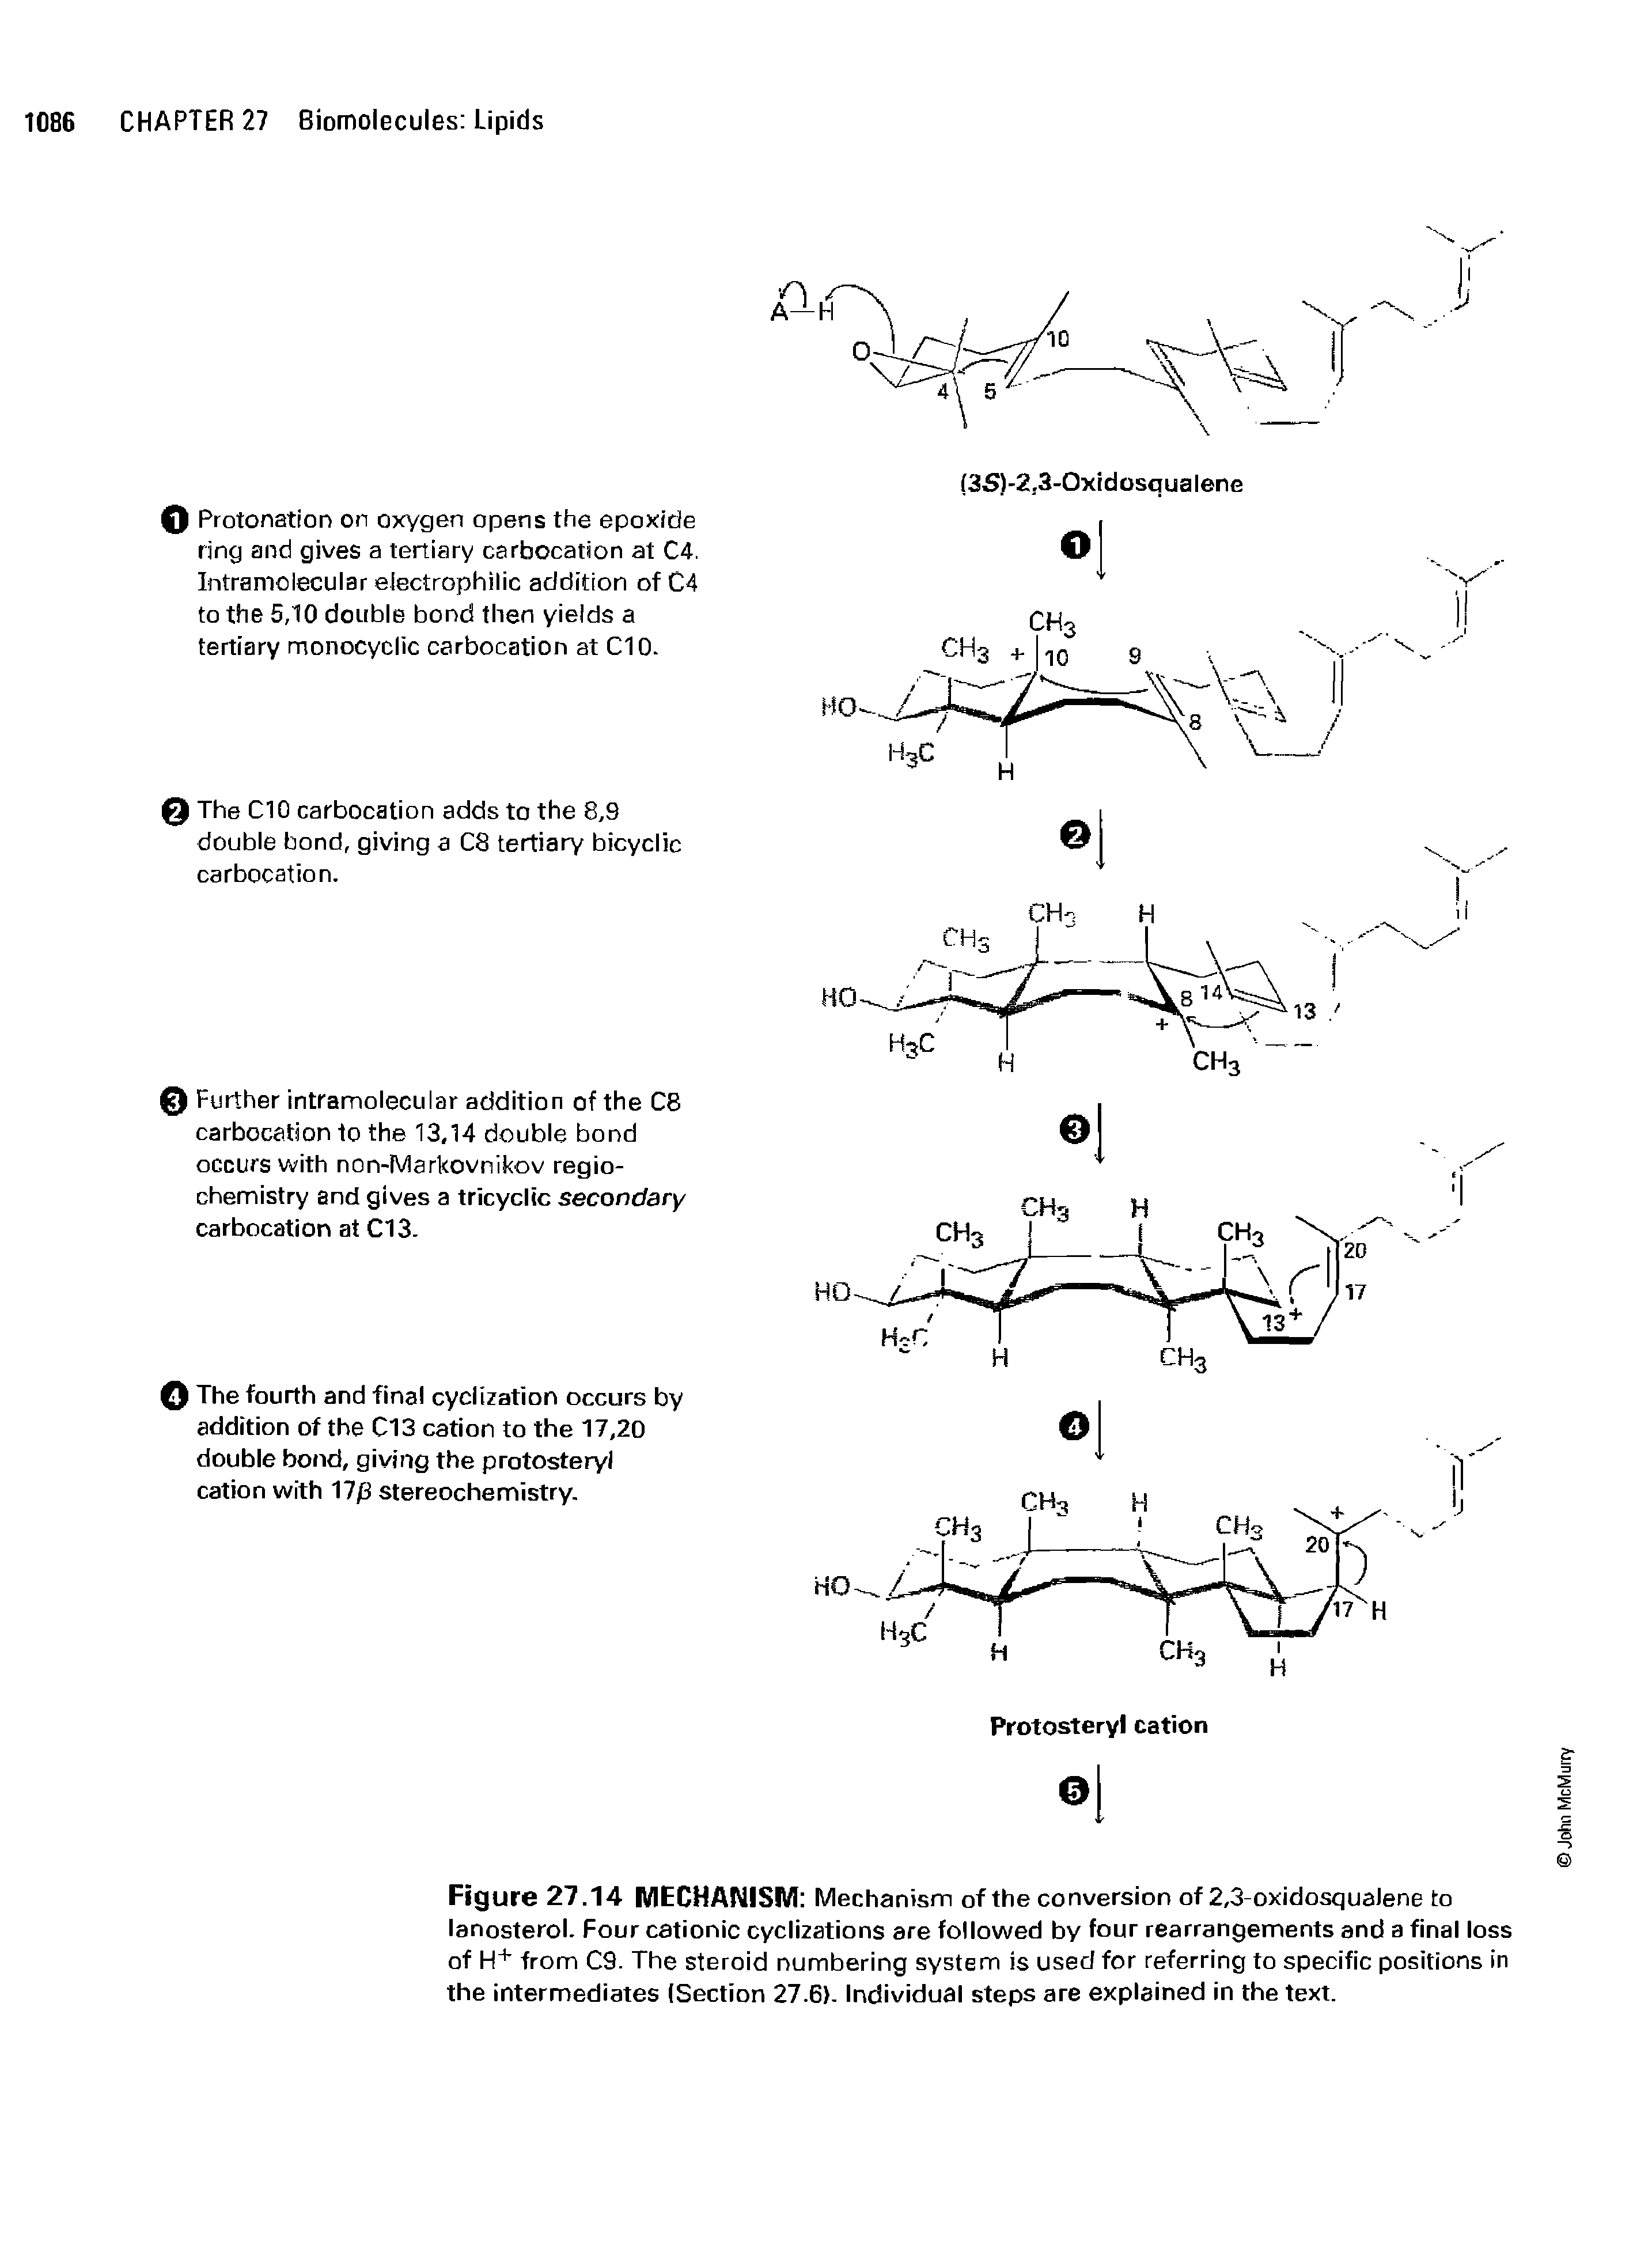 Figure 27.14 MECHANISM Mechanism of the conversion of 2,3-oxidosquaJene to lanosterol. Four cationic cyclizations are followed by four rearrangements and a final loss of H+ from C9. The steroid numbering system is used for referring to specific positions in the intermediates (Section 27.6). Individual steps are explained in the text.